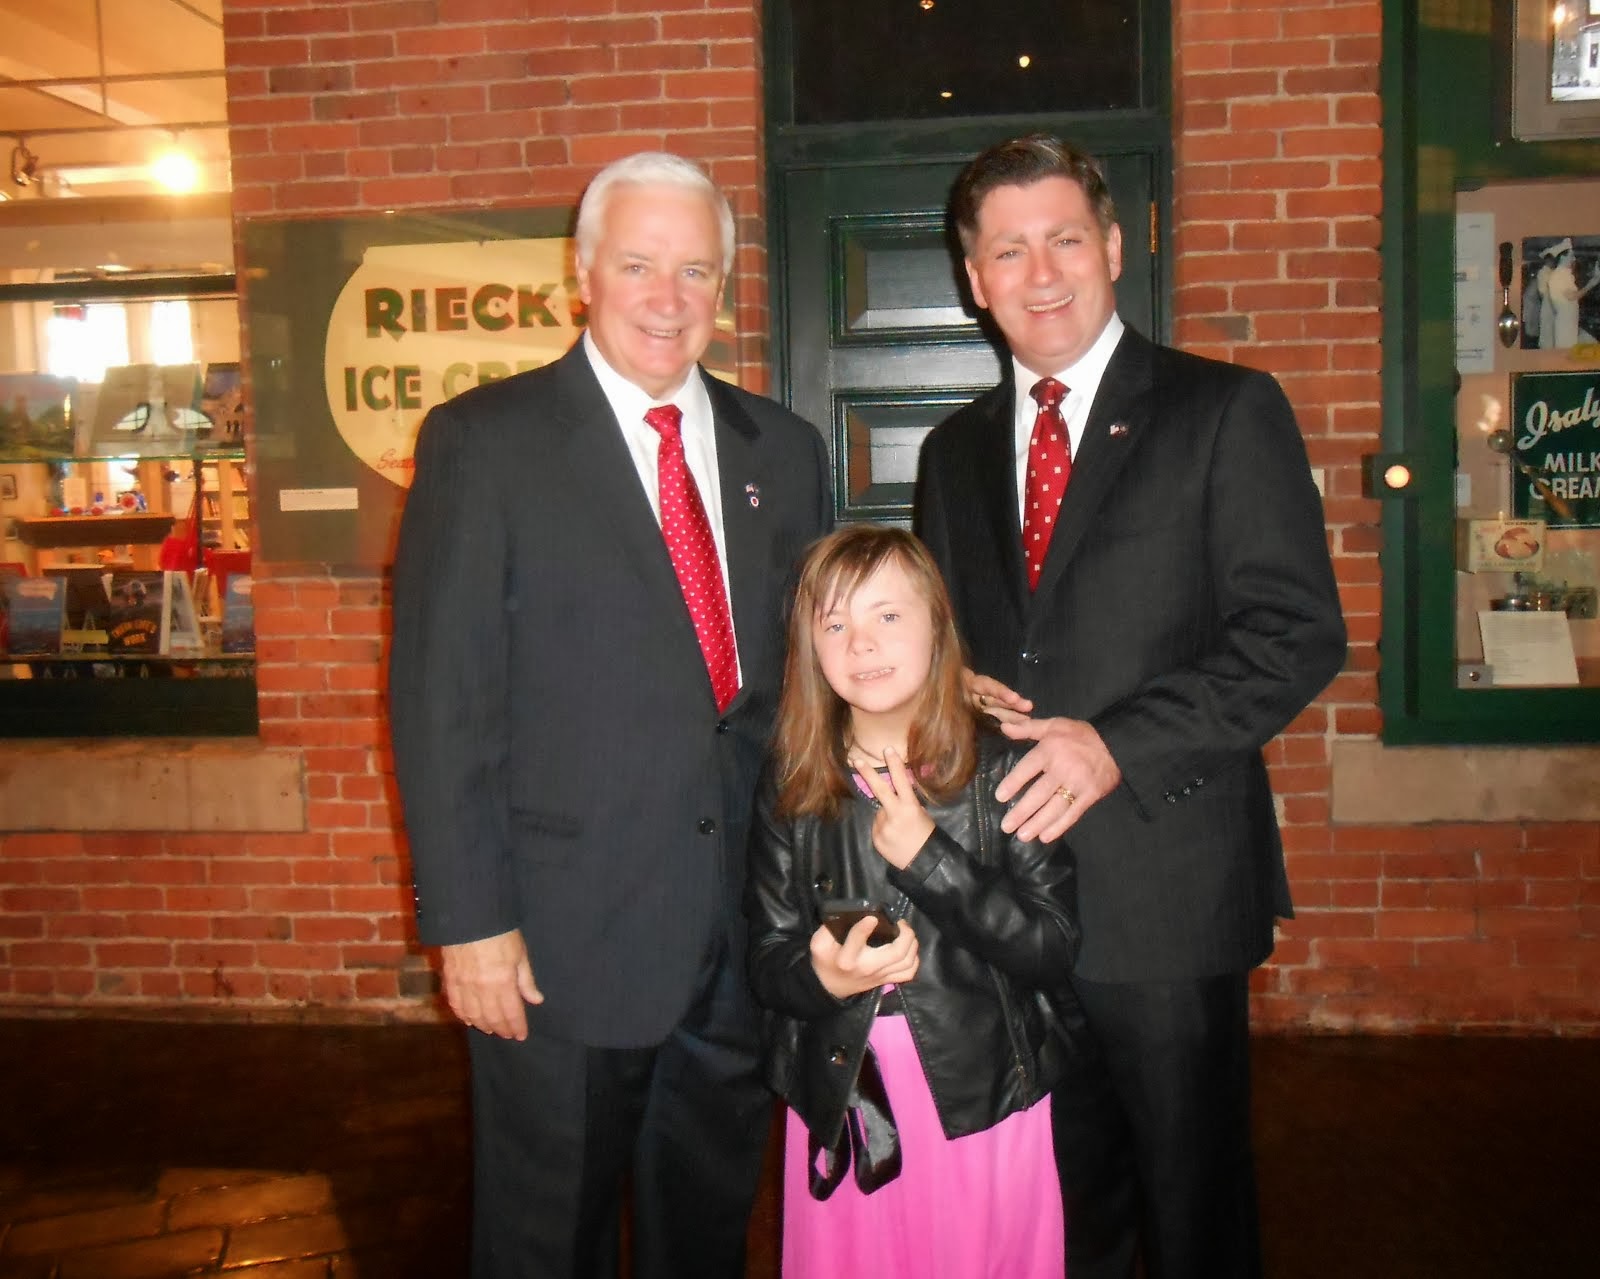 Chloe meets with PA Gov. Corbett and Lt. Gov. Cawley at Pittsburgh Event